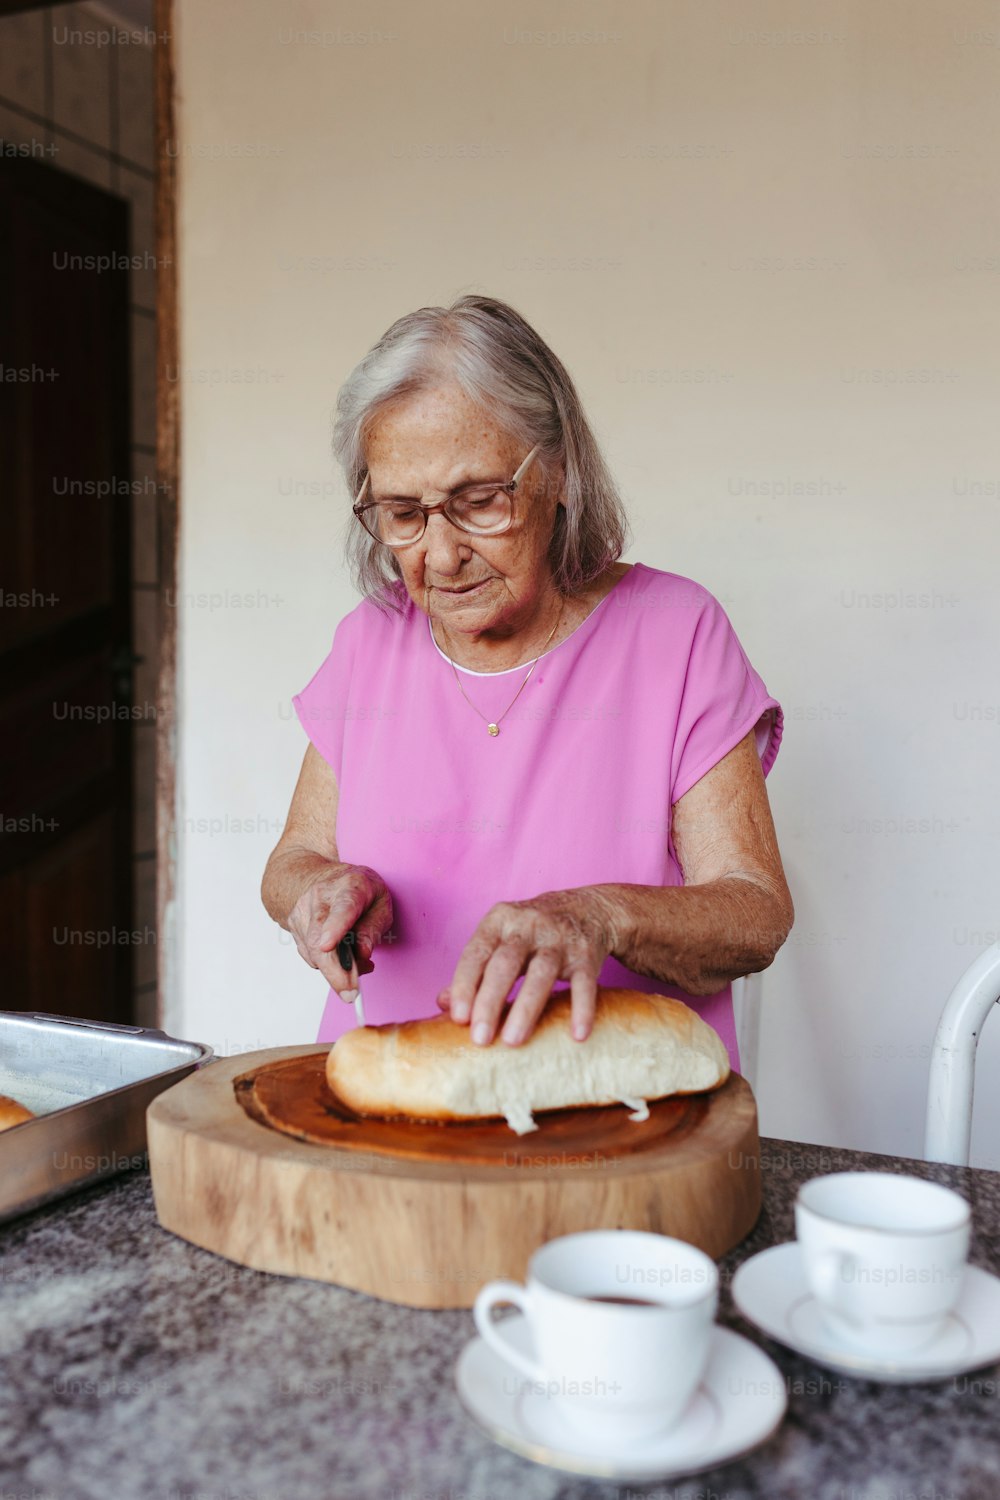 a woman in a pink shirt is making a sandwich